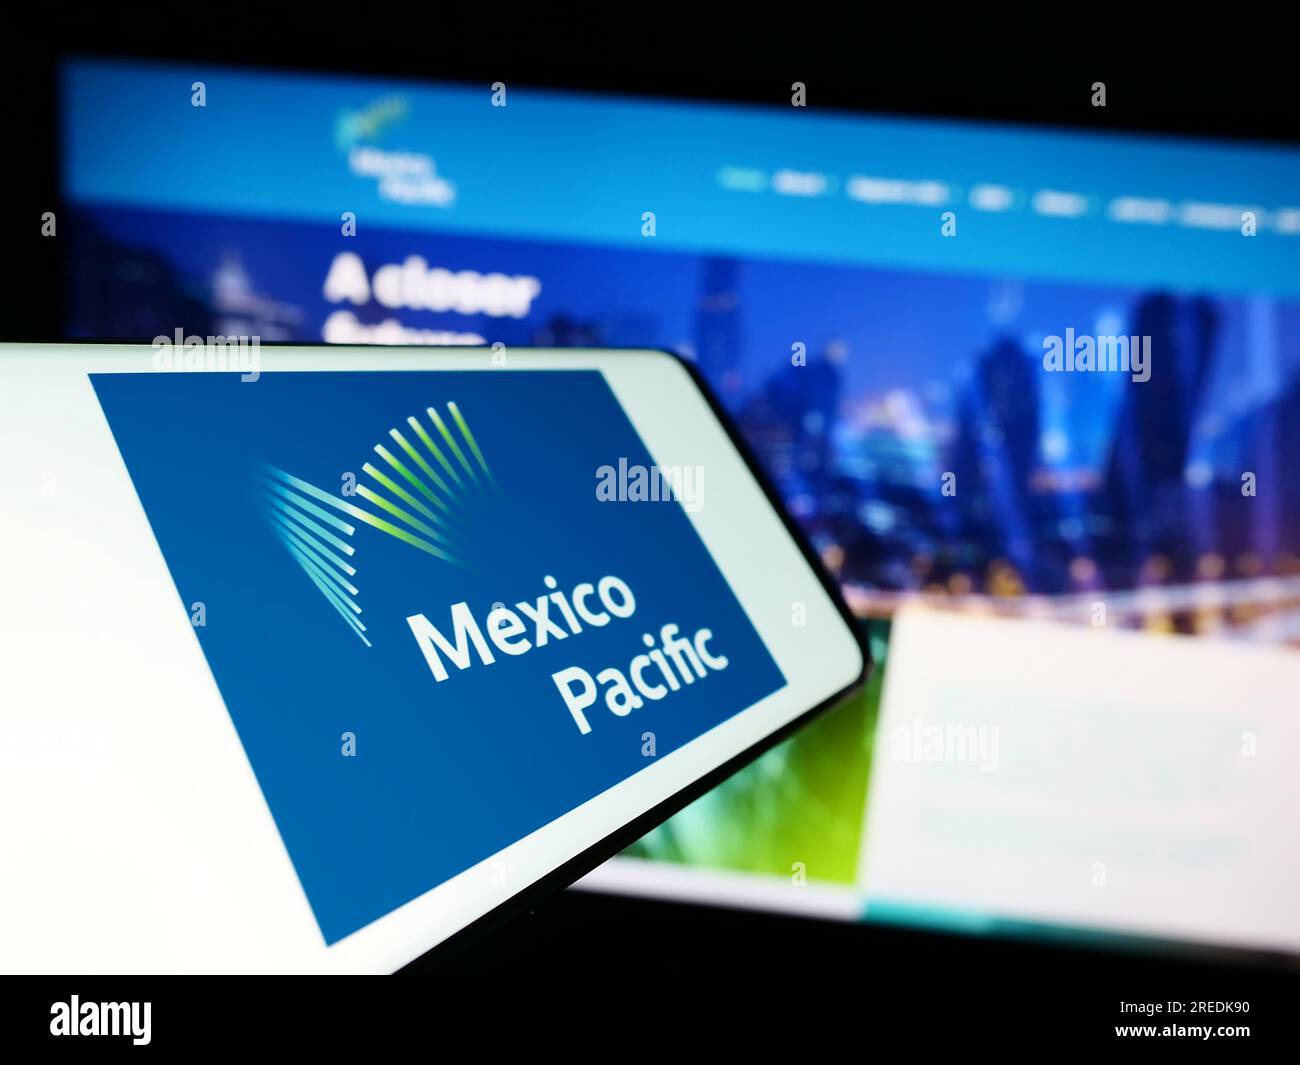 Mobile phone with logo of company Mexico Pacific Ltd. LLC on screen in front of business website. Focus on center-left of phone display. Stock Photo